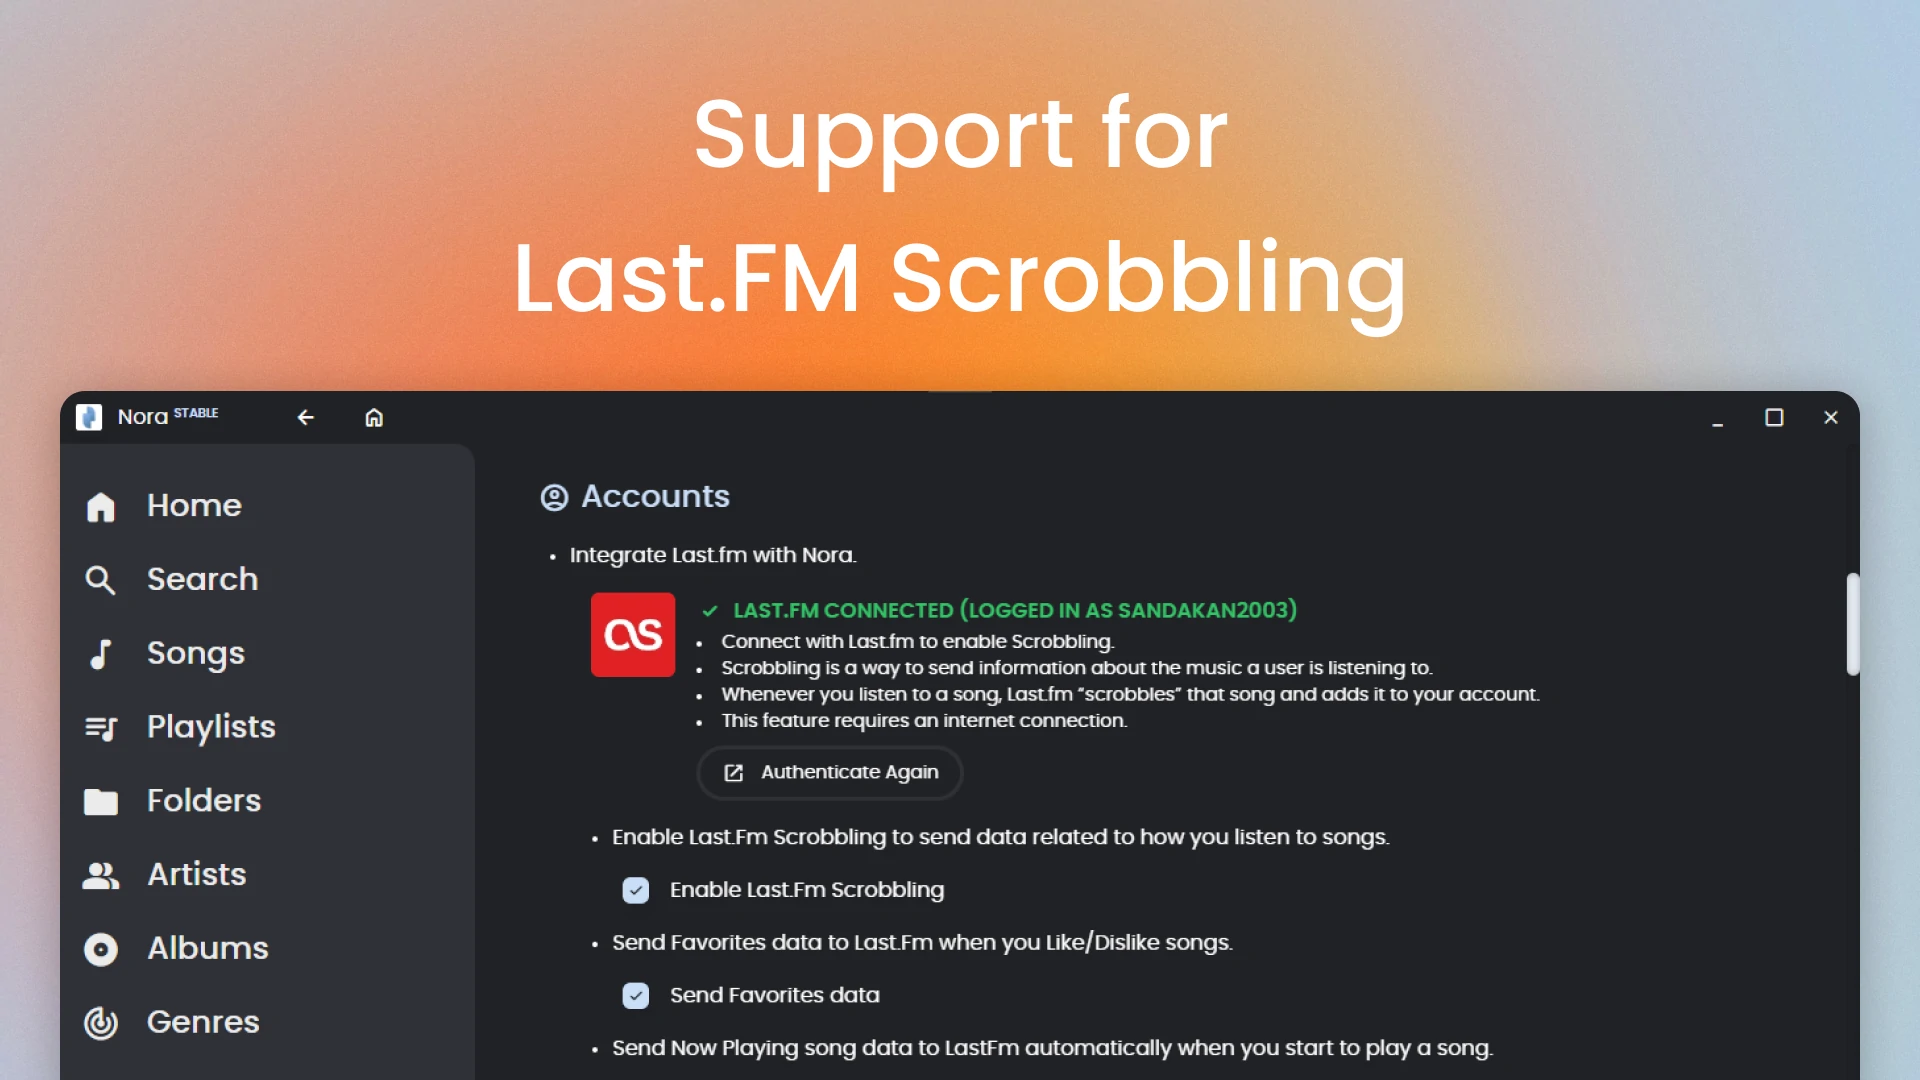 Support for Last.FM Scrobbling